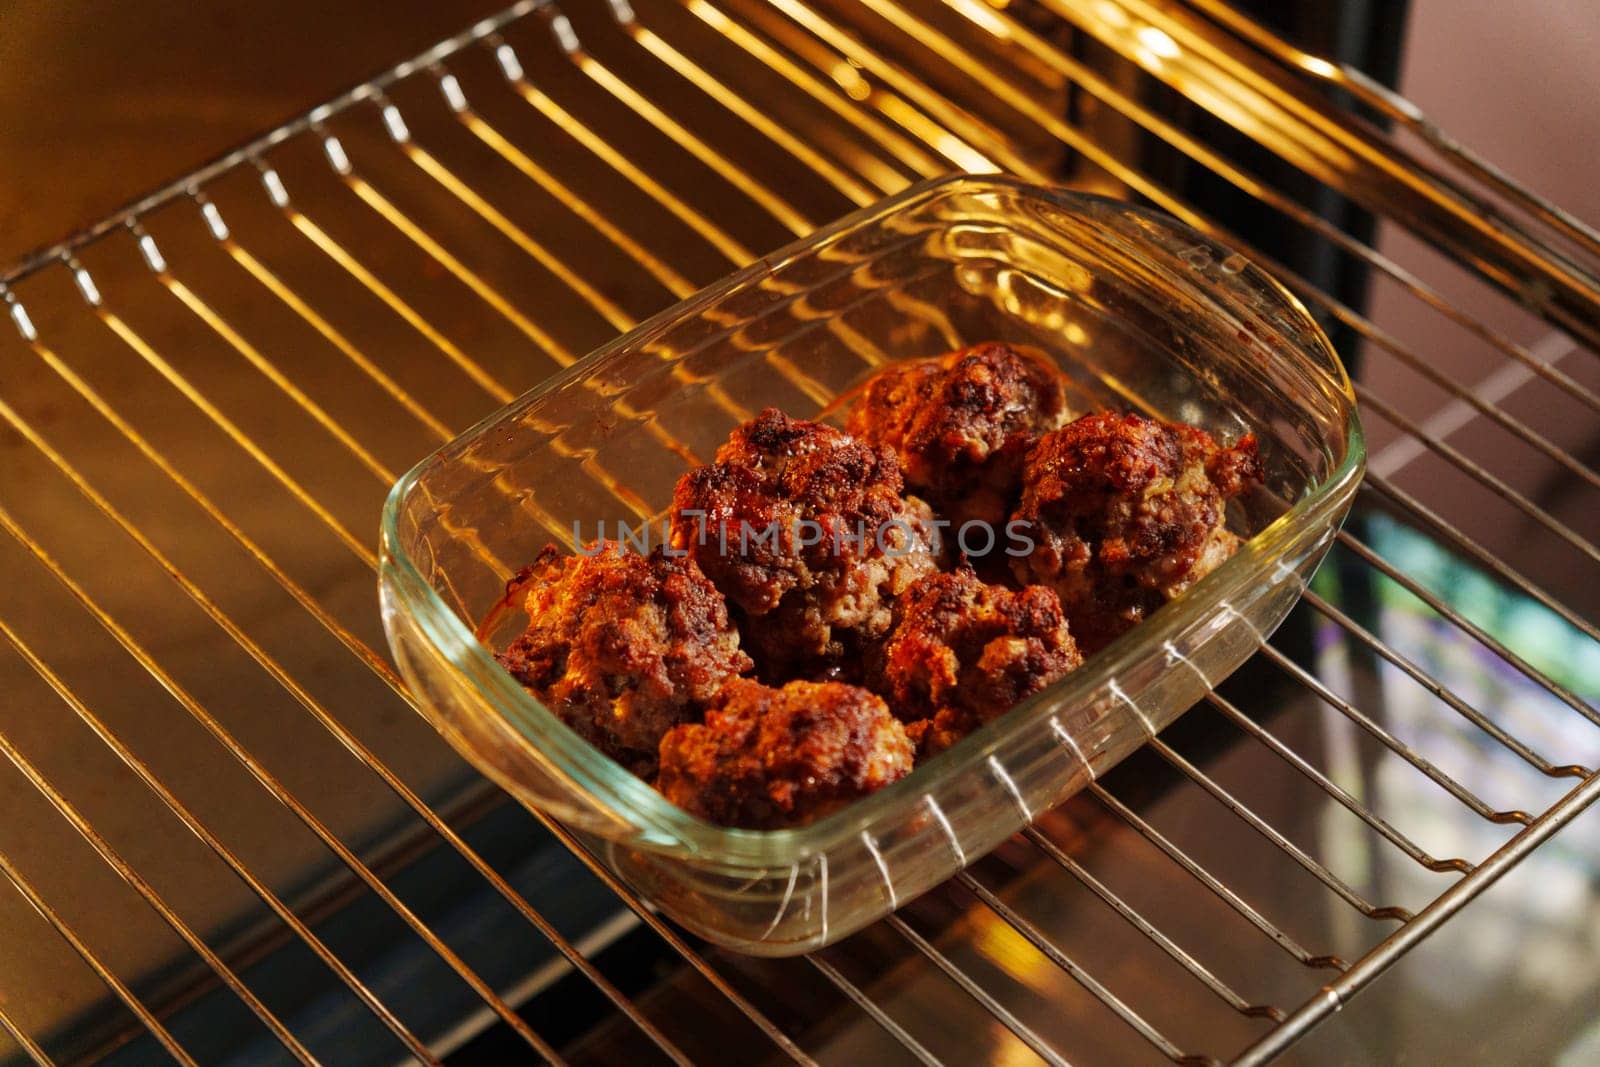 Sizzling Homemade Meatballs Fresh From the Oven Captured at Dinner Time